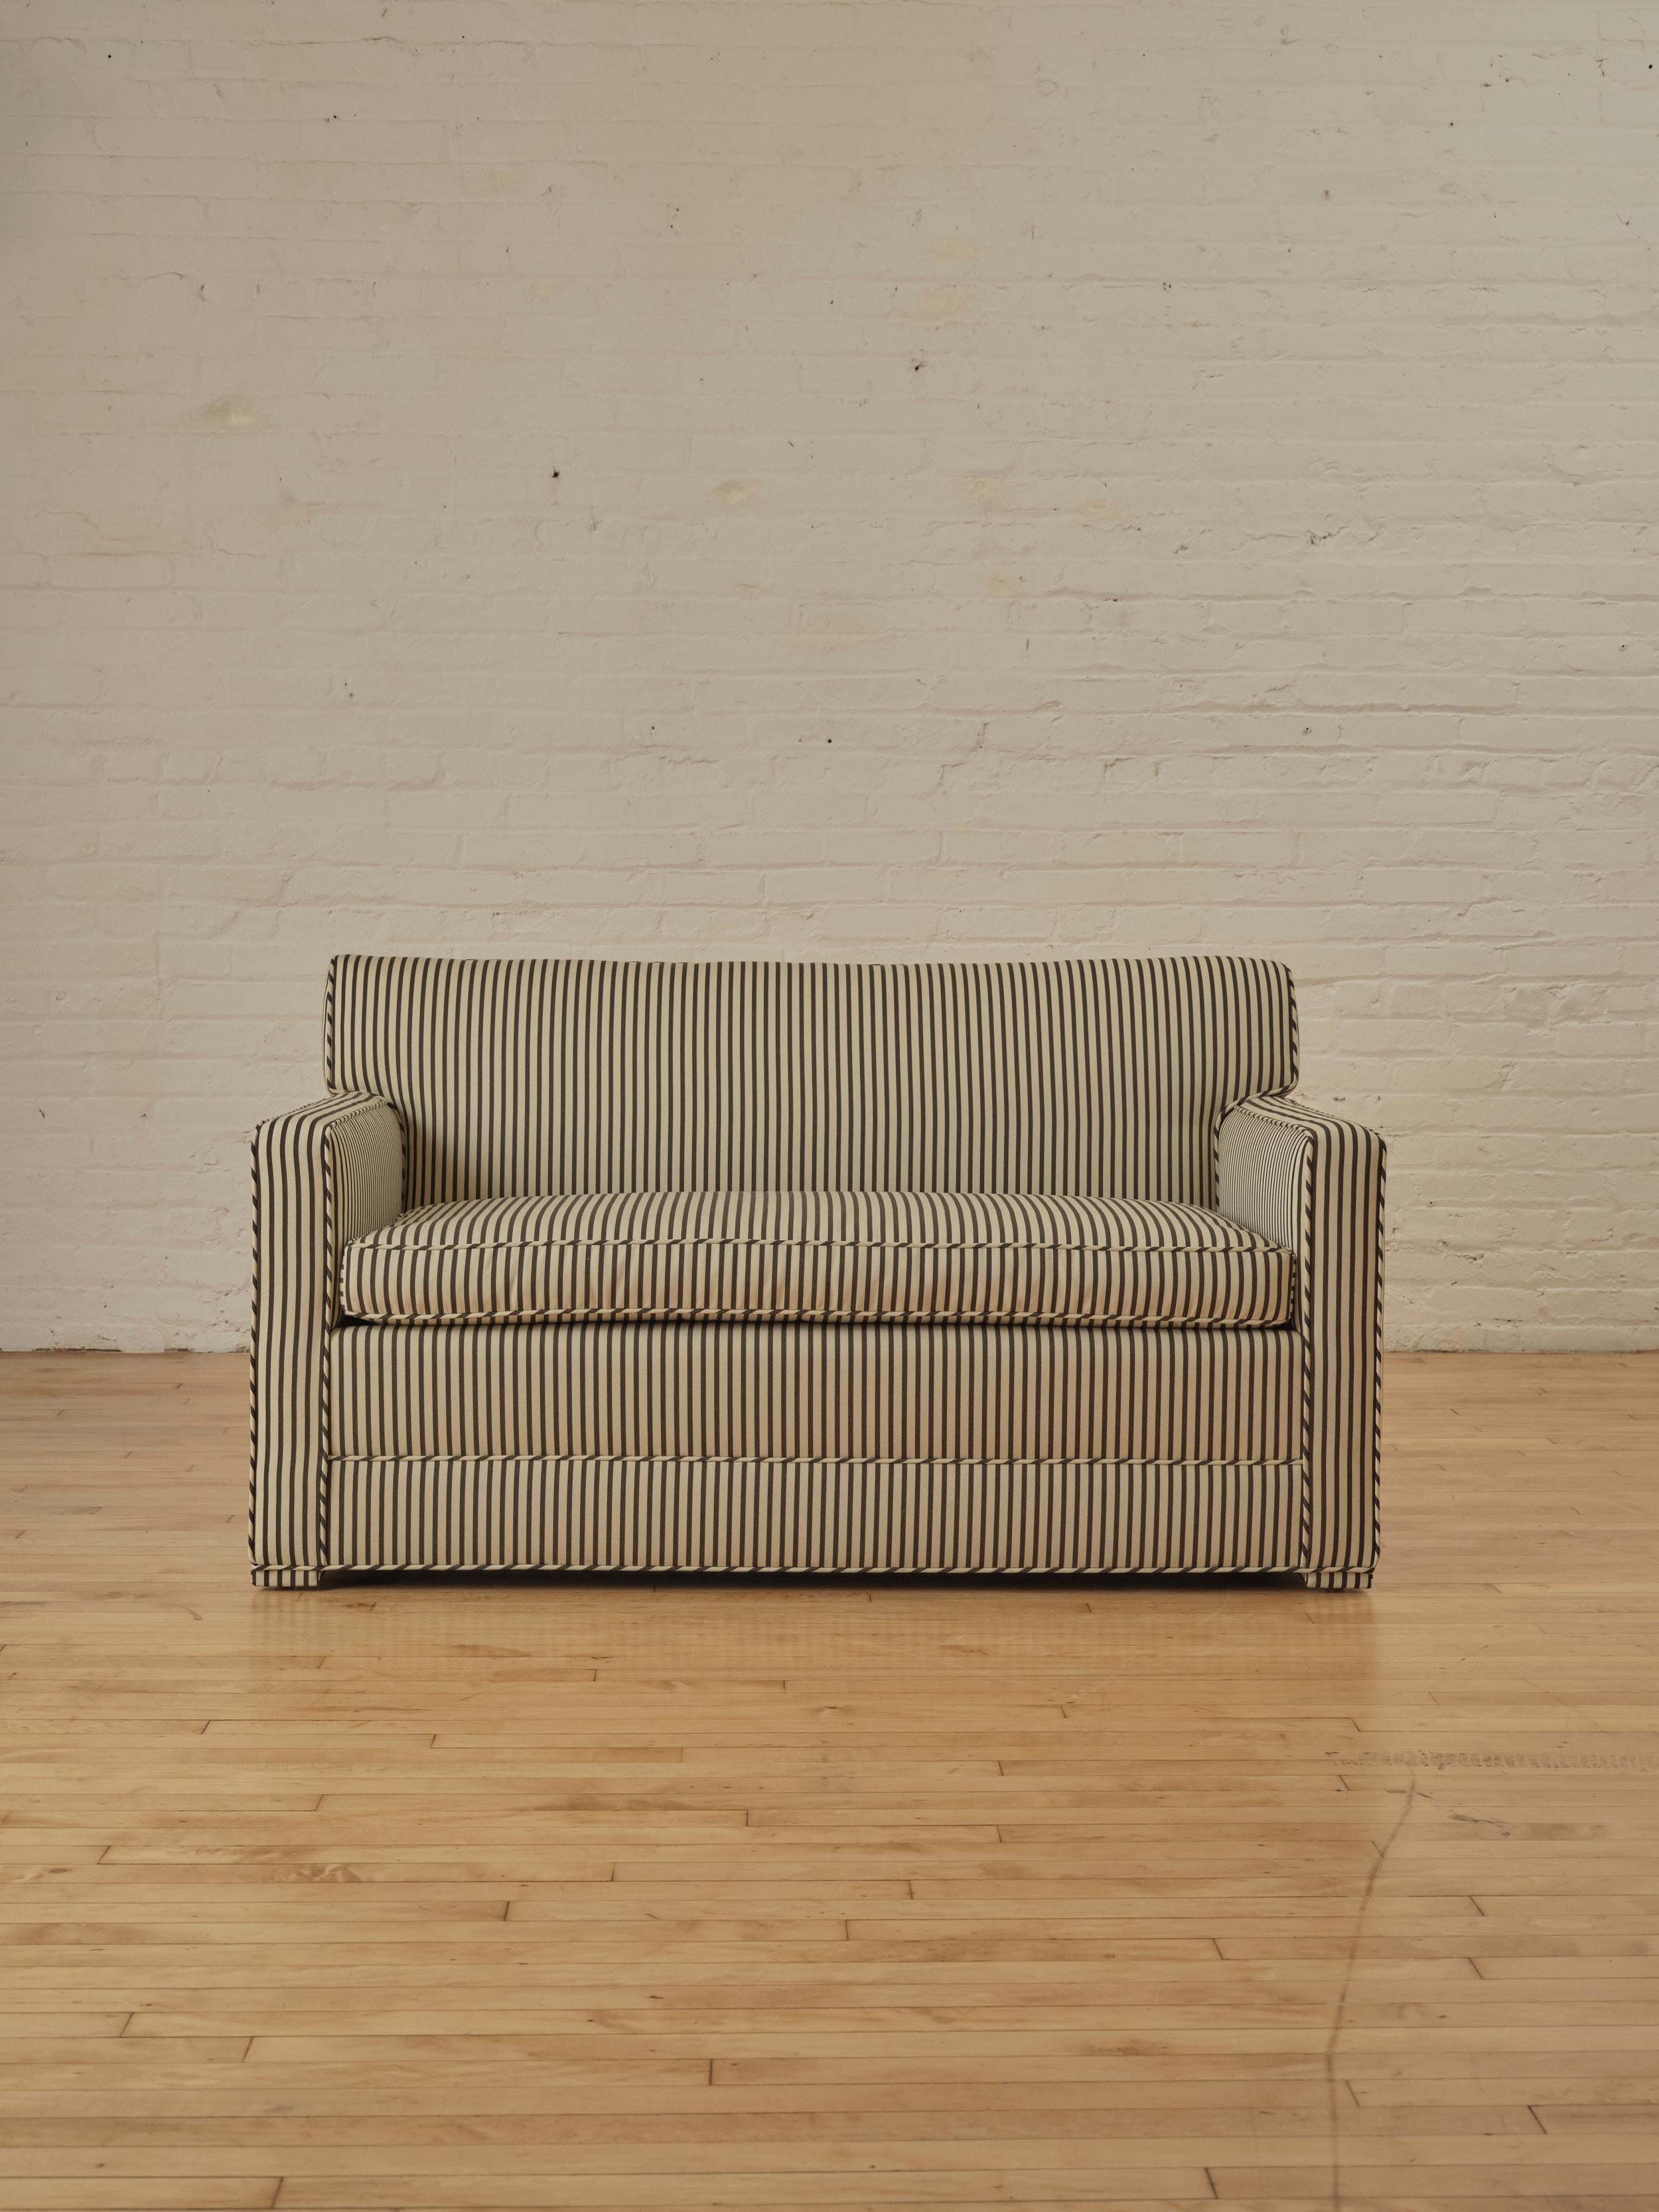 Modernist loveseat reupholstered in Dedar Milano's, Strange Love fabric in chocolate and ivory stripe pattern with a matching piping detail. The loveseats compact design makes it an ideal choice for both small and spacious living spaces.